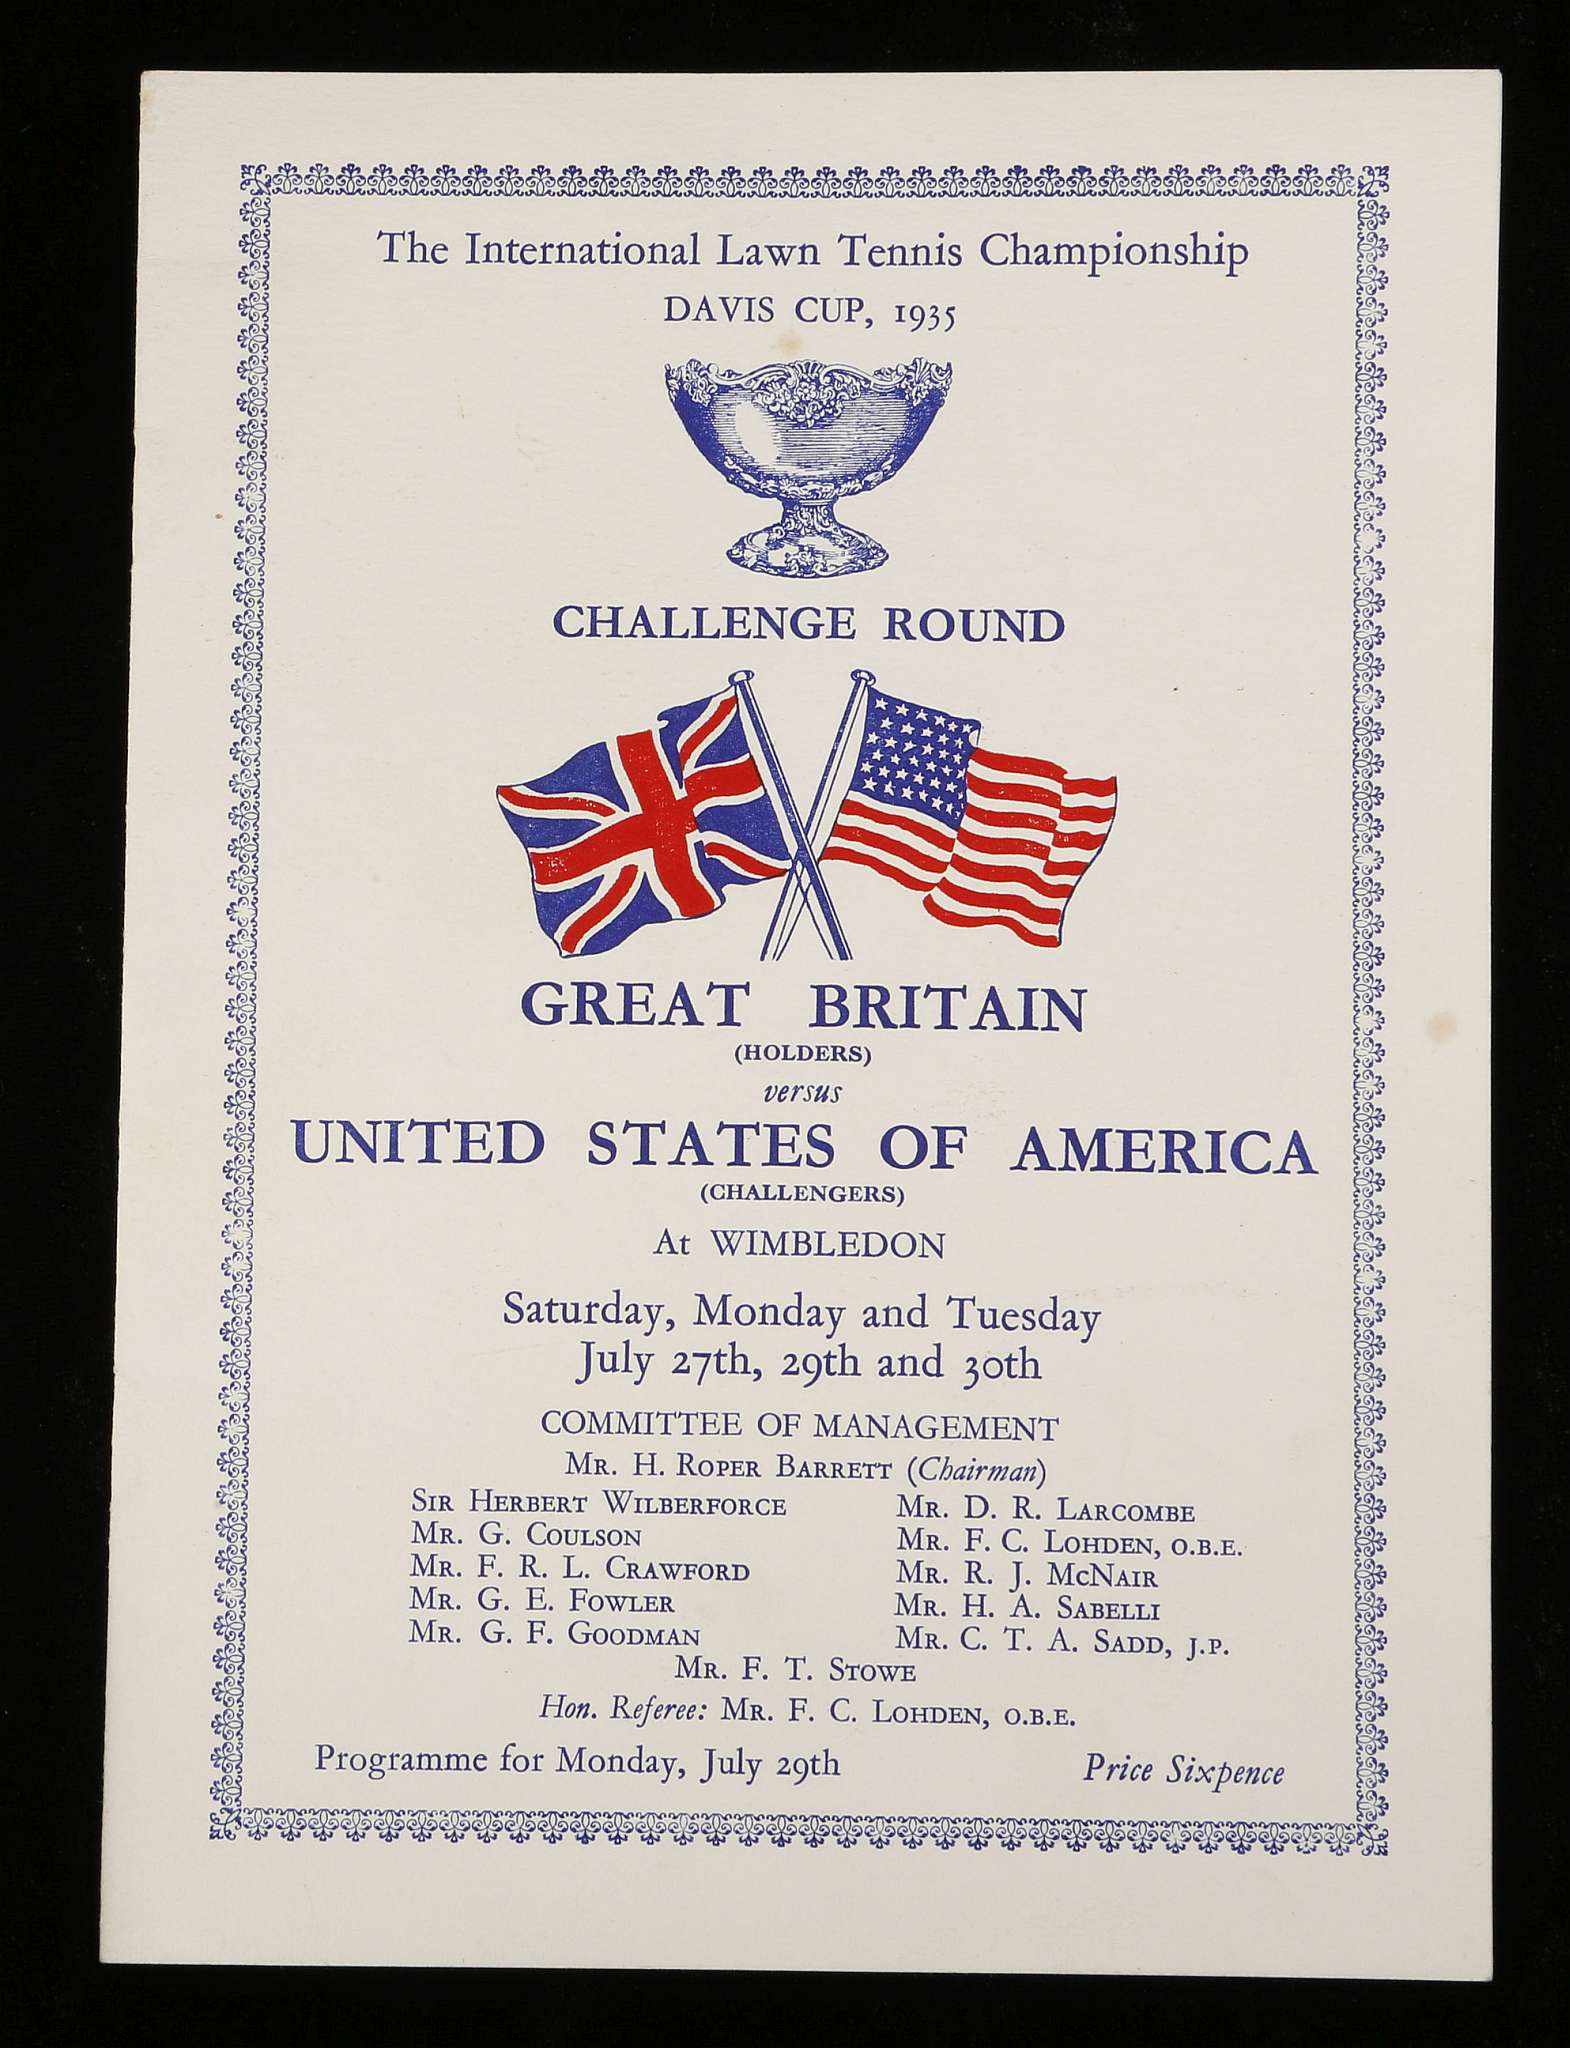 A 1935 Davis Cup programme, Great Britain v. USA, with Fred Perry playing in the challenge round